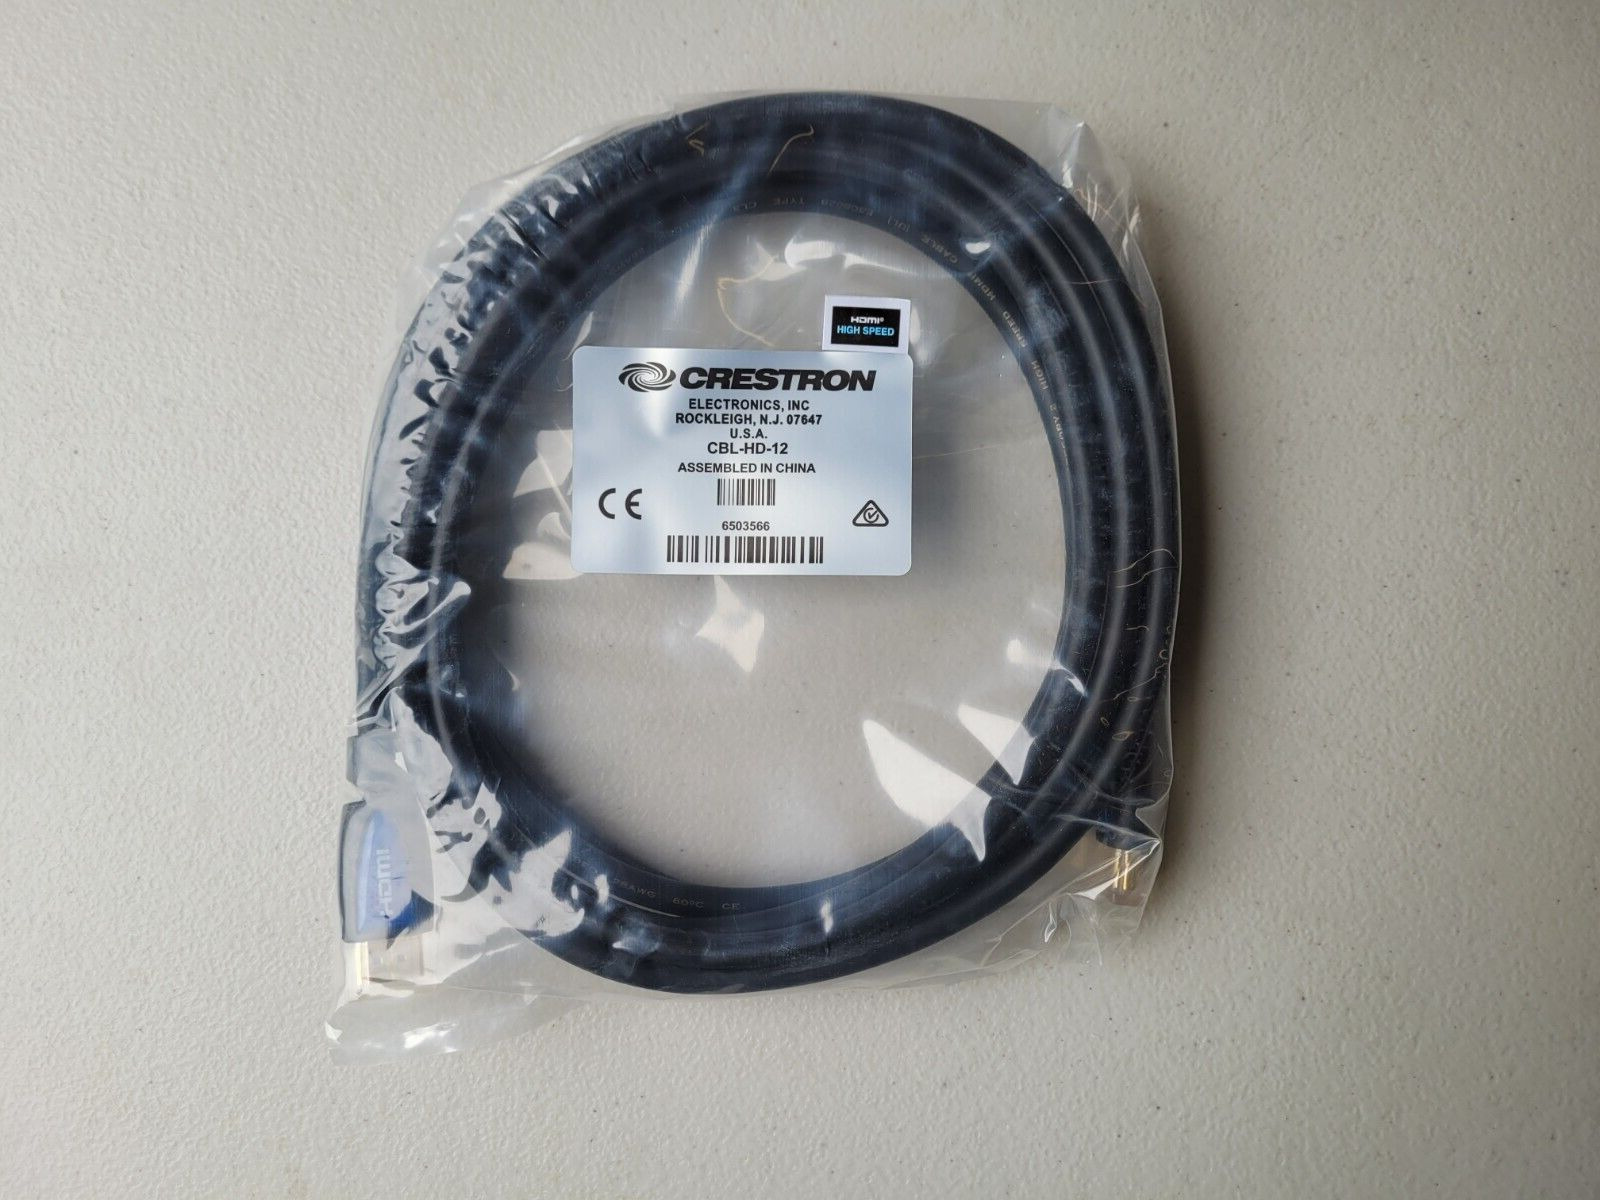 CRESTRON CBL-HD-12 HDMI INTERFACE CABLE 12FT BRAND NEW